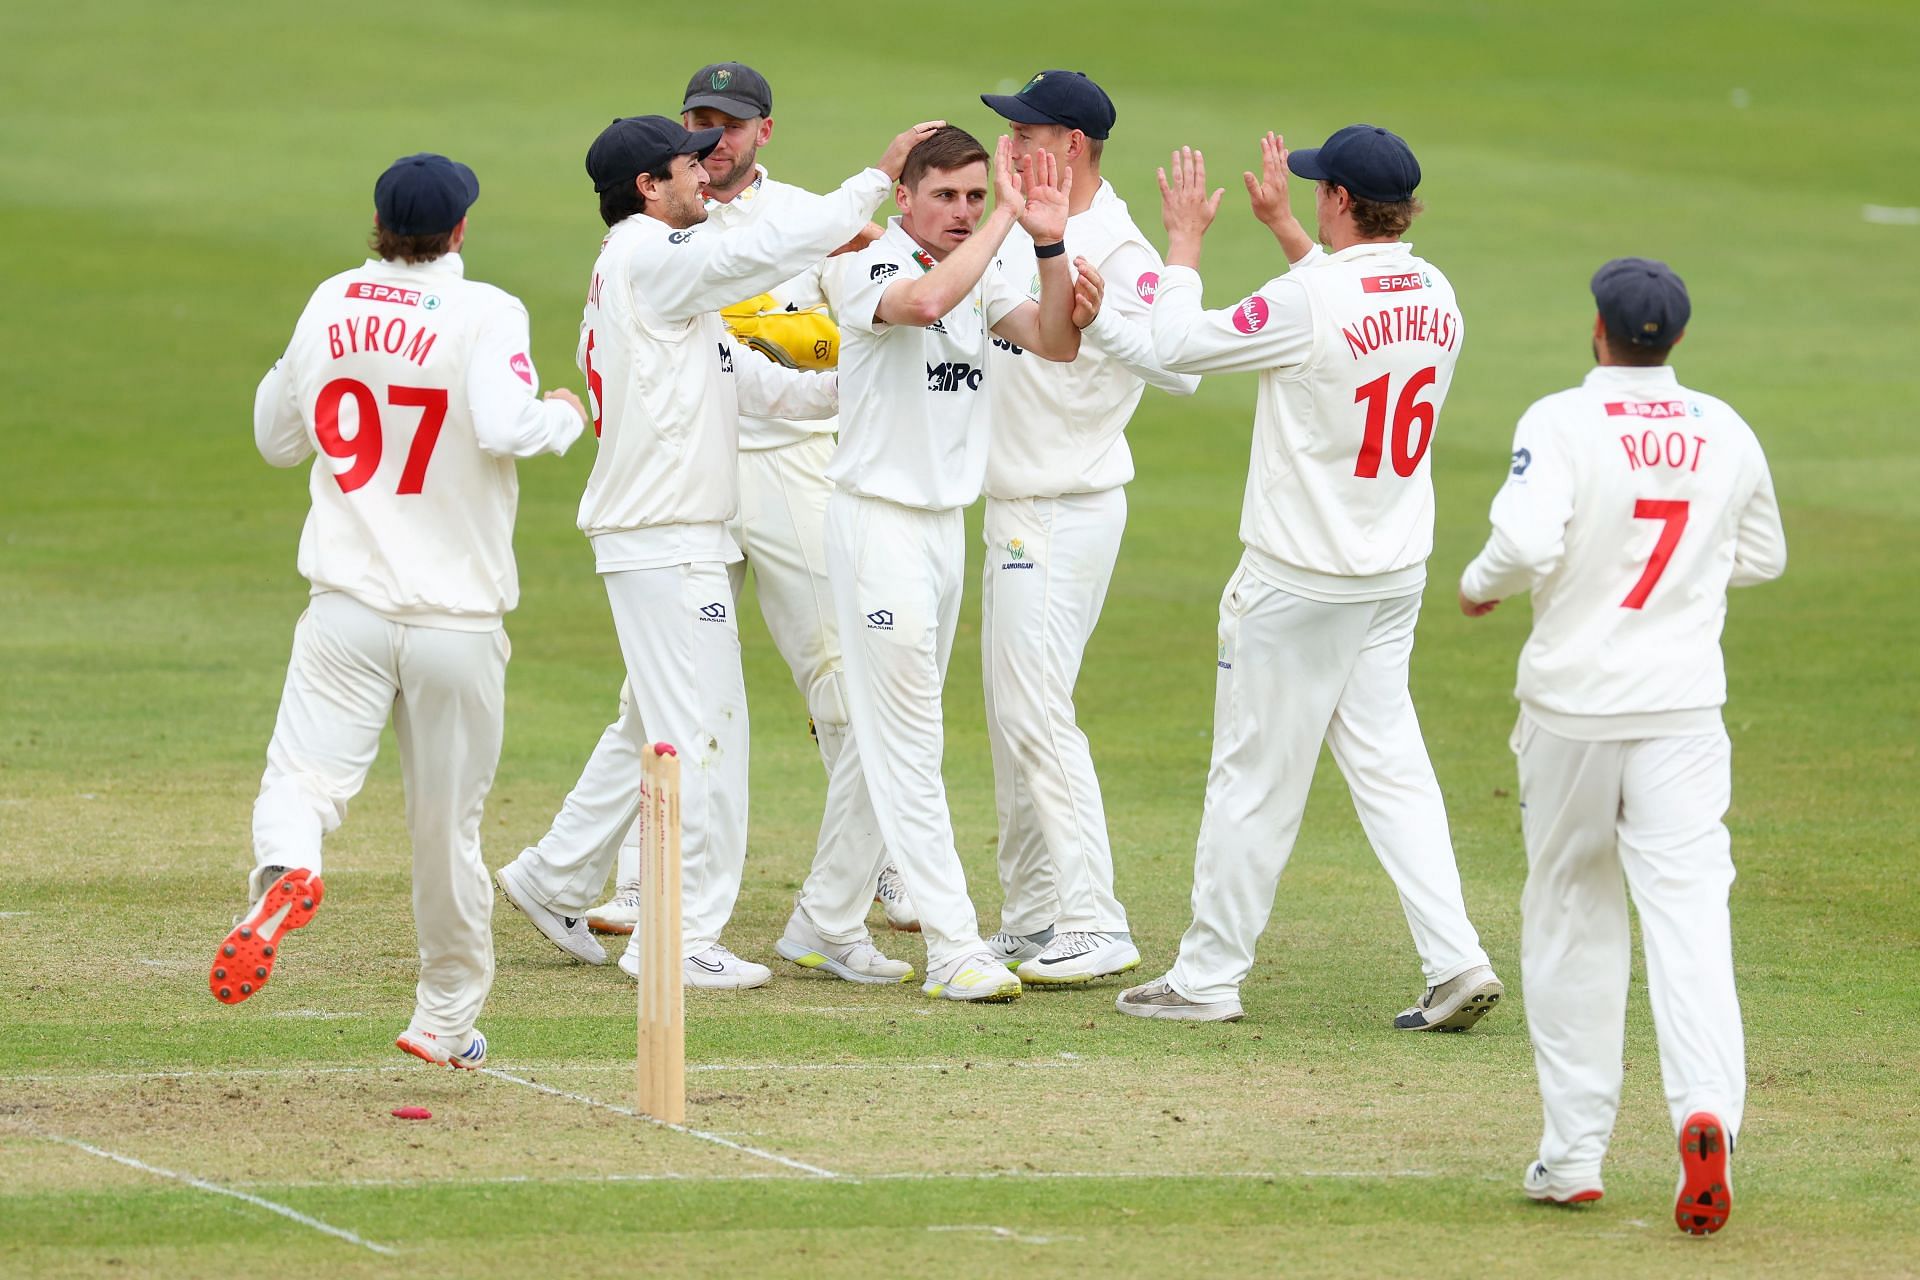 [Watch] County match ends in a tie after wicket falls on last ball as Glamorgan get all out for 592 in run-chase of 593 against Gloucestershire